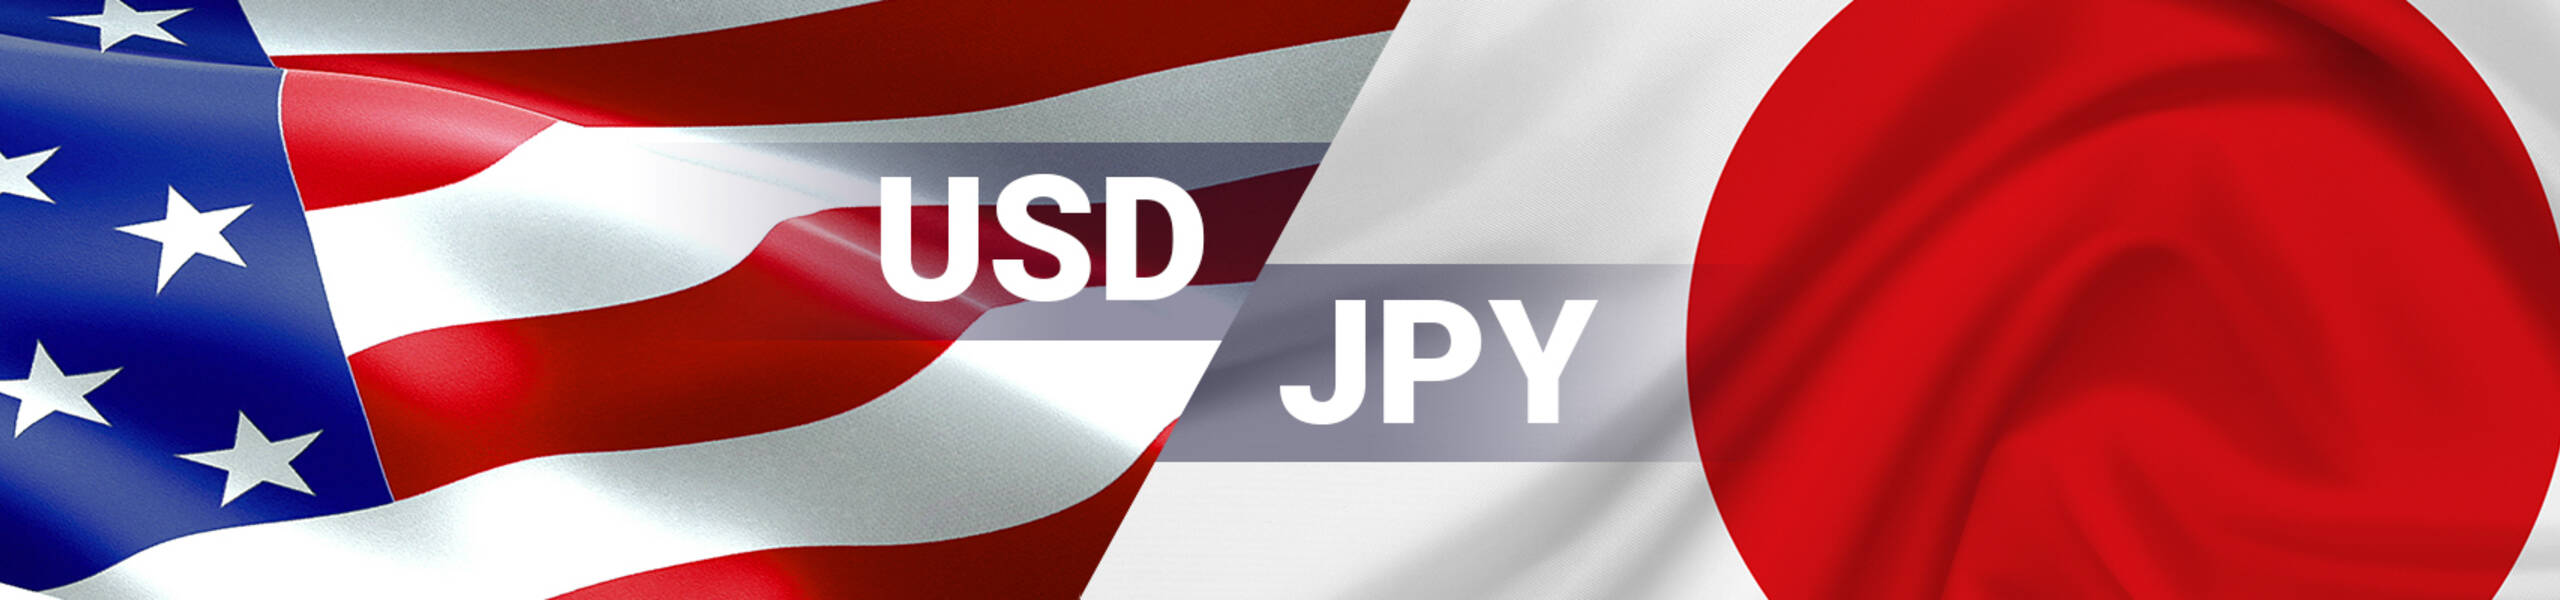 FX:為替 USD/JPY Dailyレポート 2017/10/13